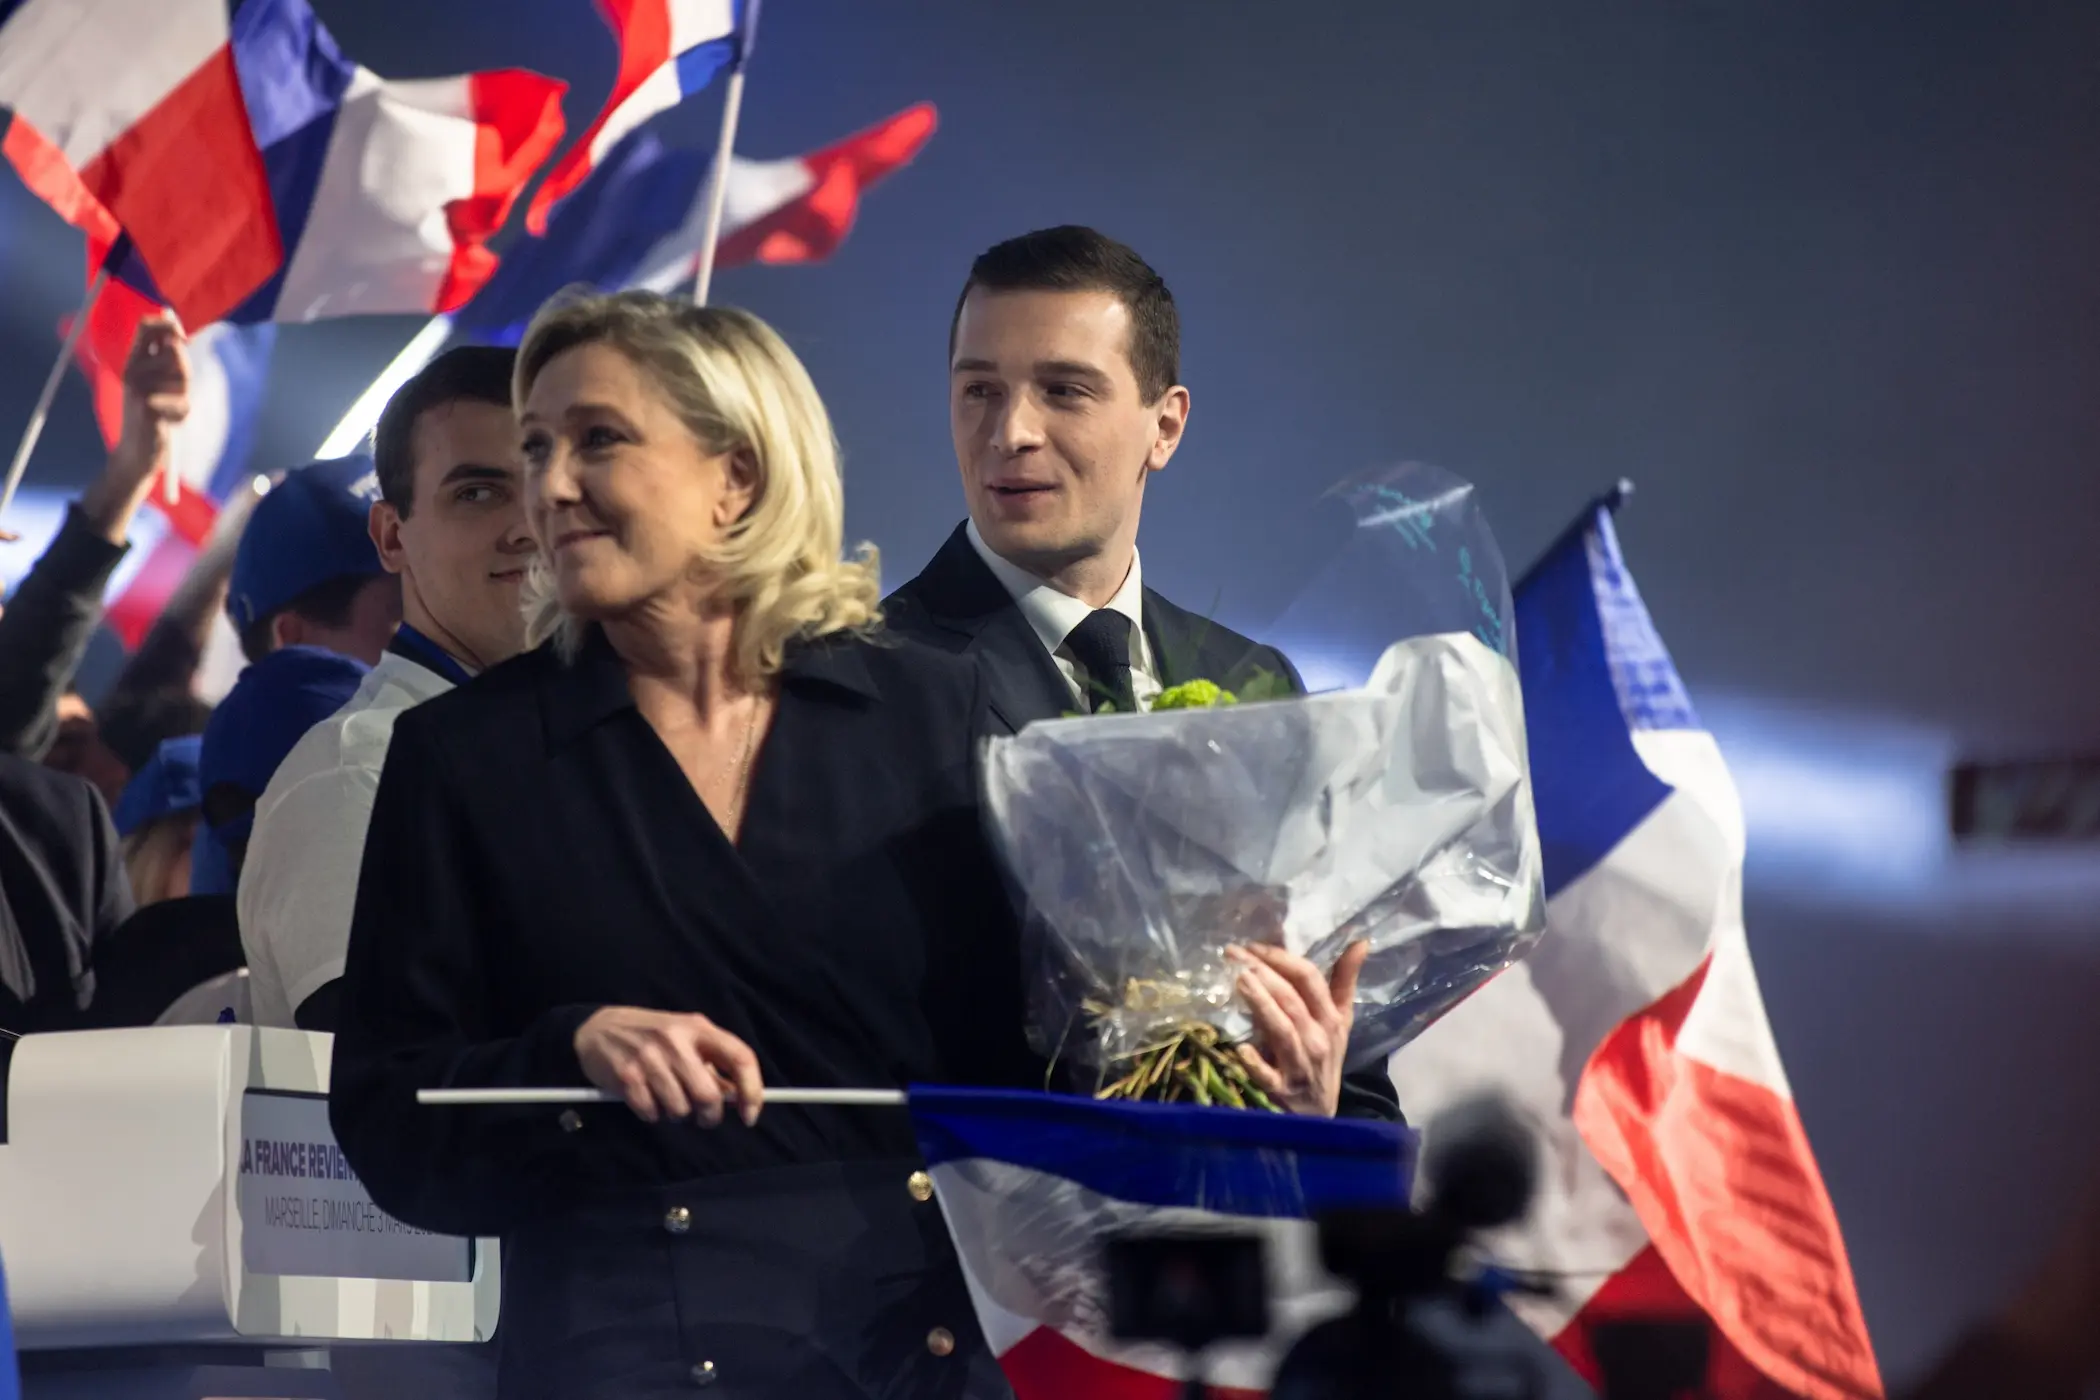 France’s Parliamentary Election: What is Going on in Paris?